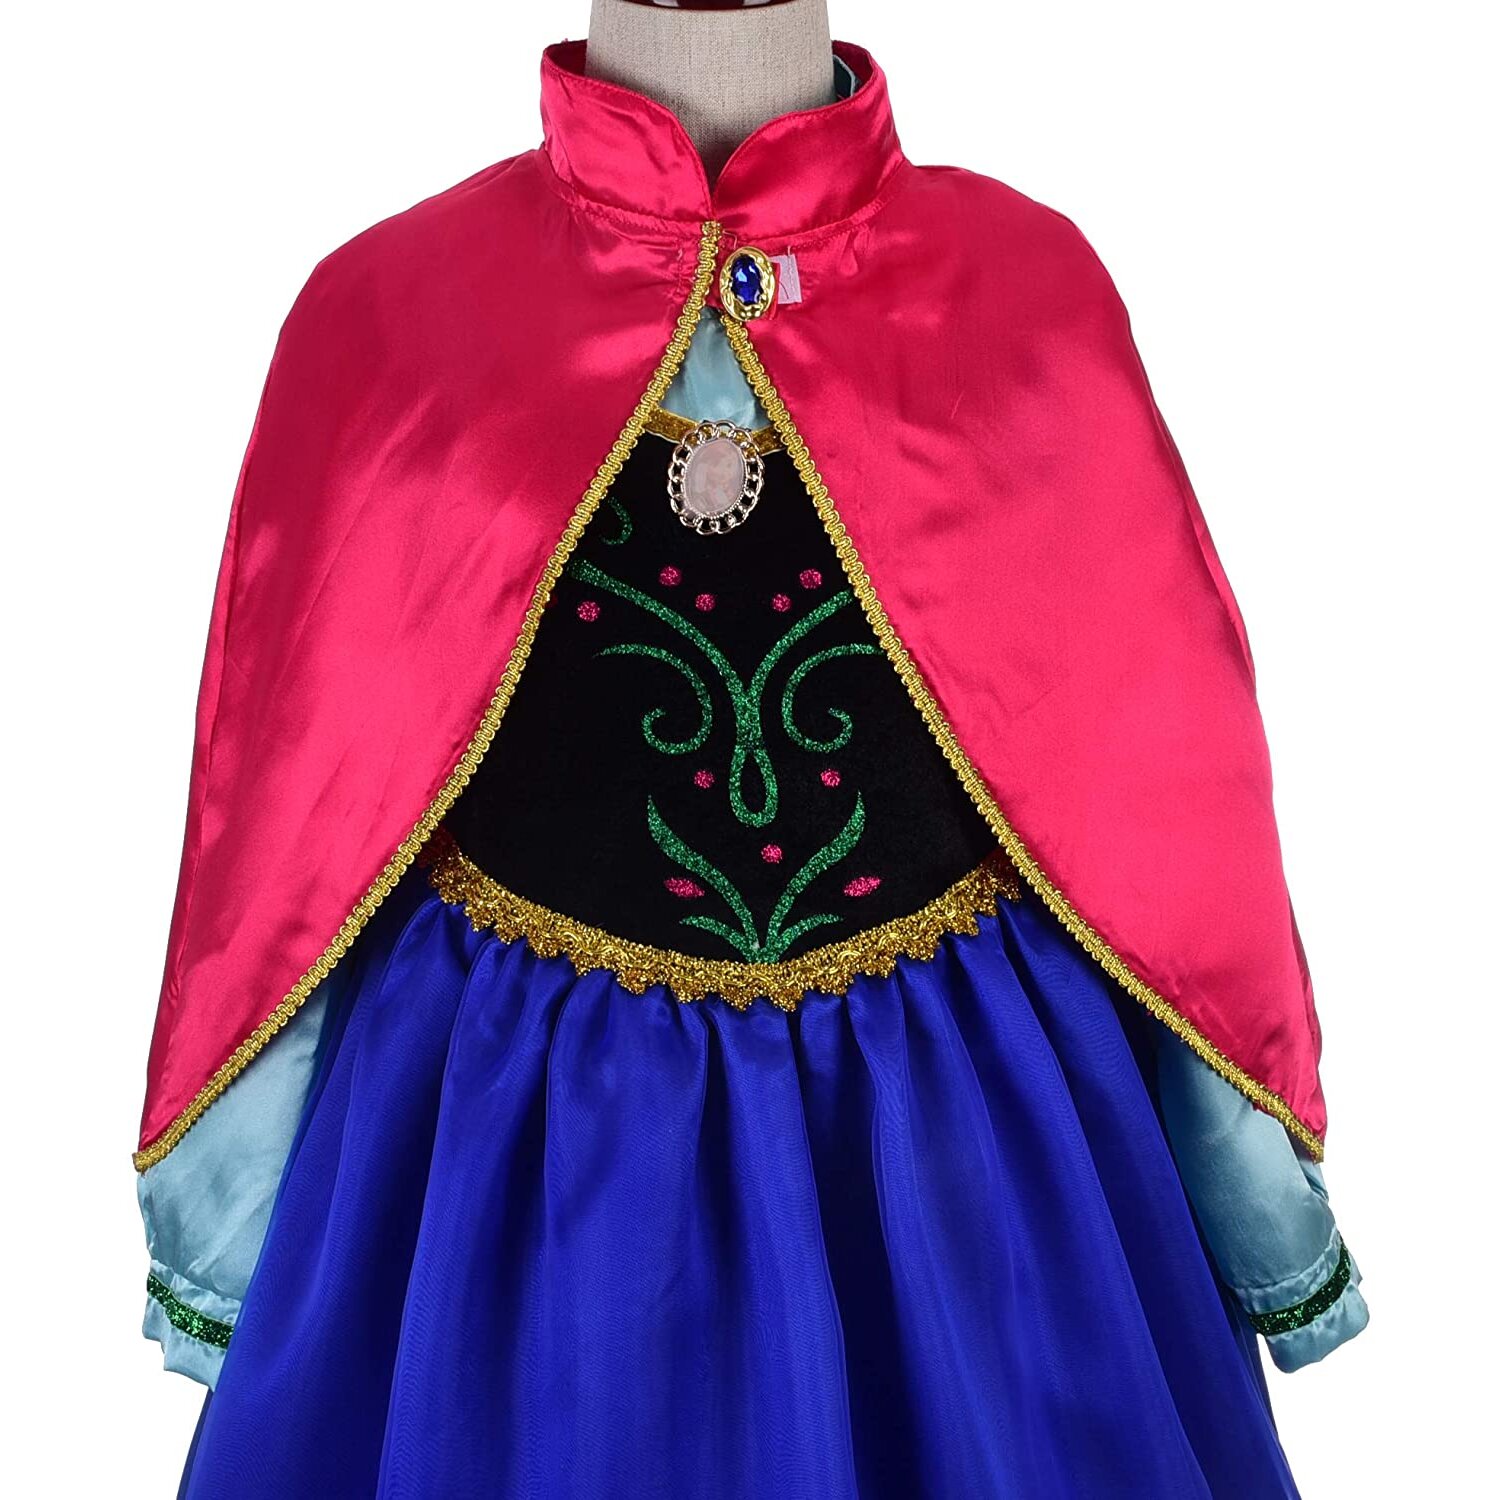 Lito Angels Princess Anna Costume with Cape, Halloween Birthday Theme Party Fancy Dress Up, Age 2-9 Years